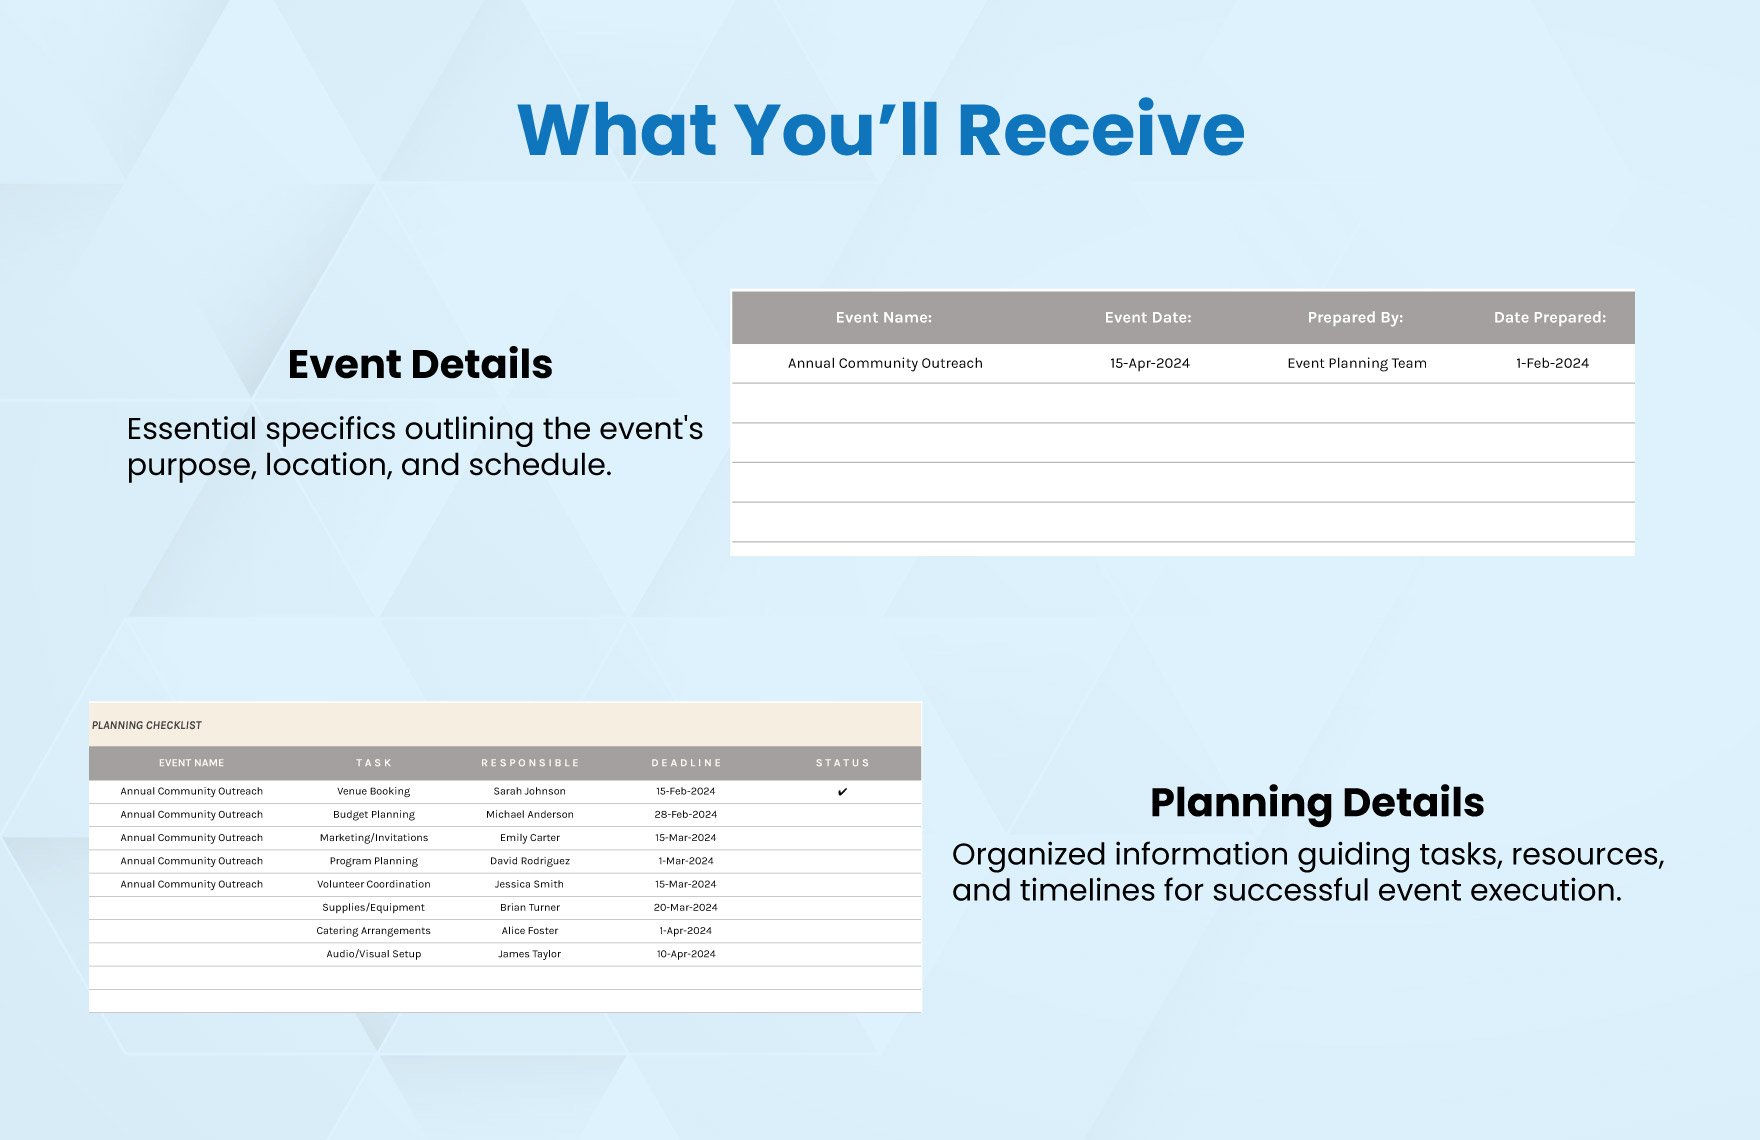 Church Event Planning Template